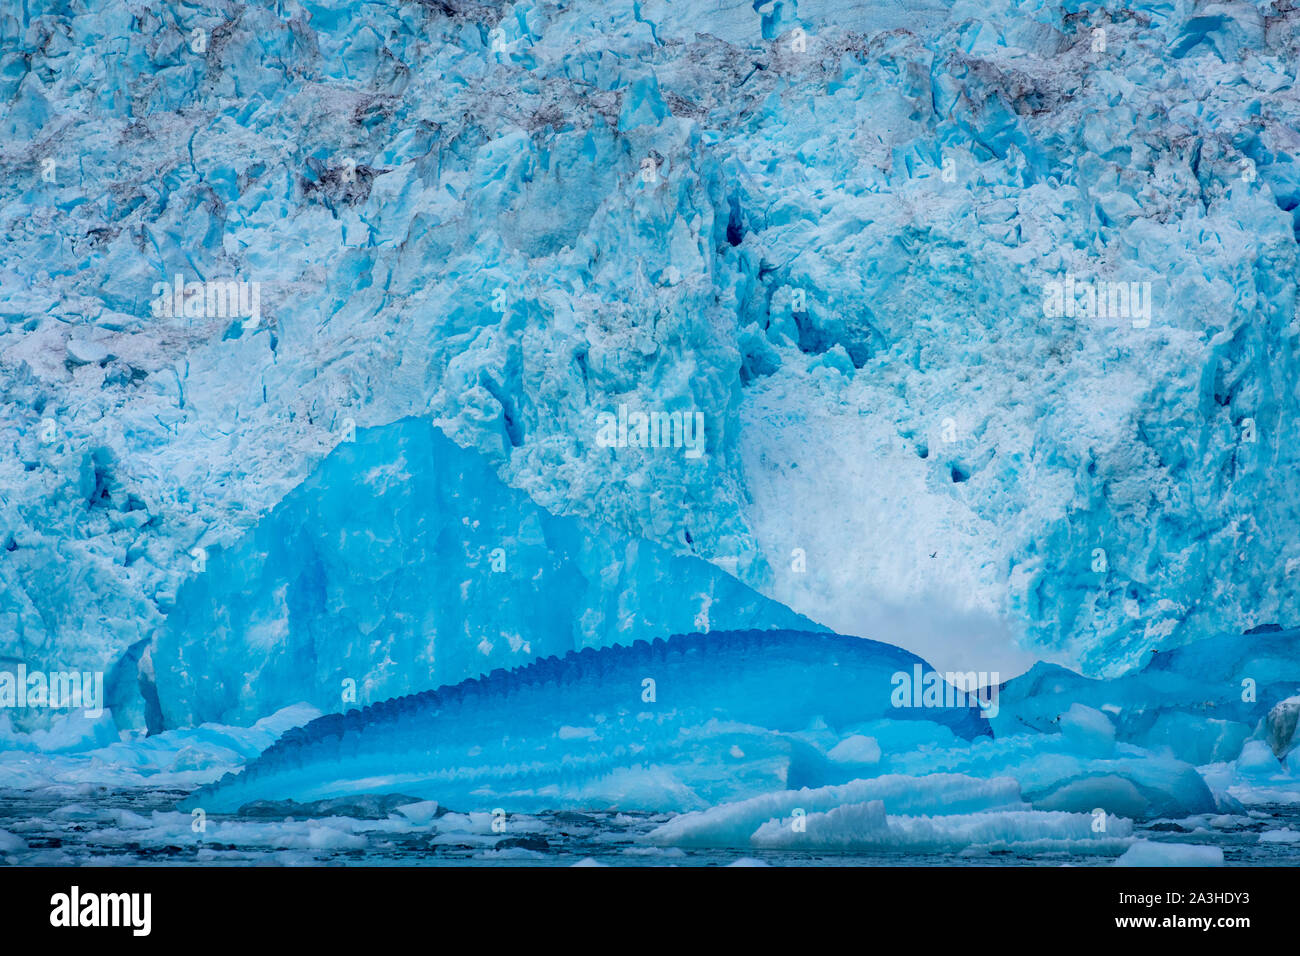 USA, Alaska, Massive blue underwater iceberg floating after calving from beneath ocean surface at face of LeConte Glacier east of Petersburg Stock Photo